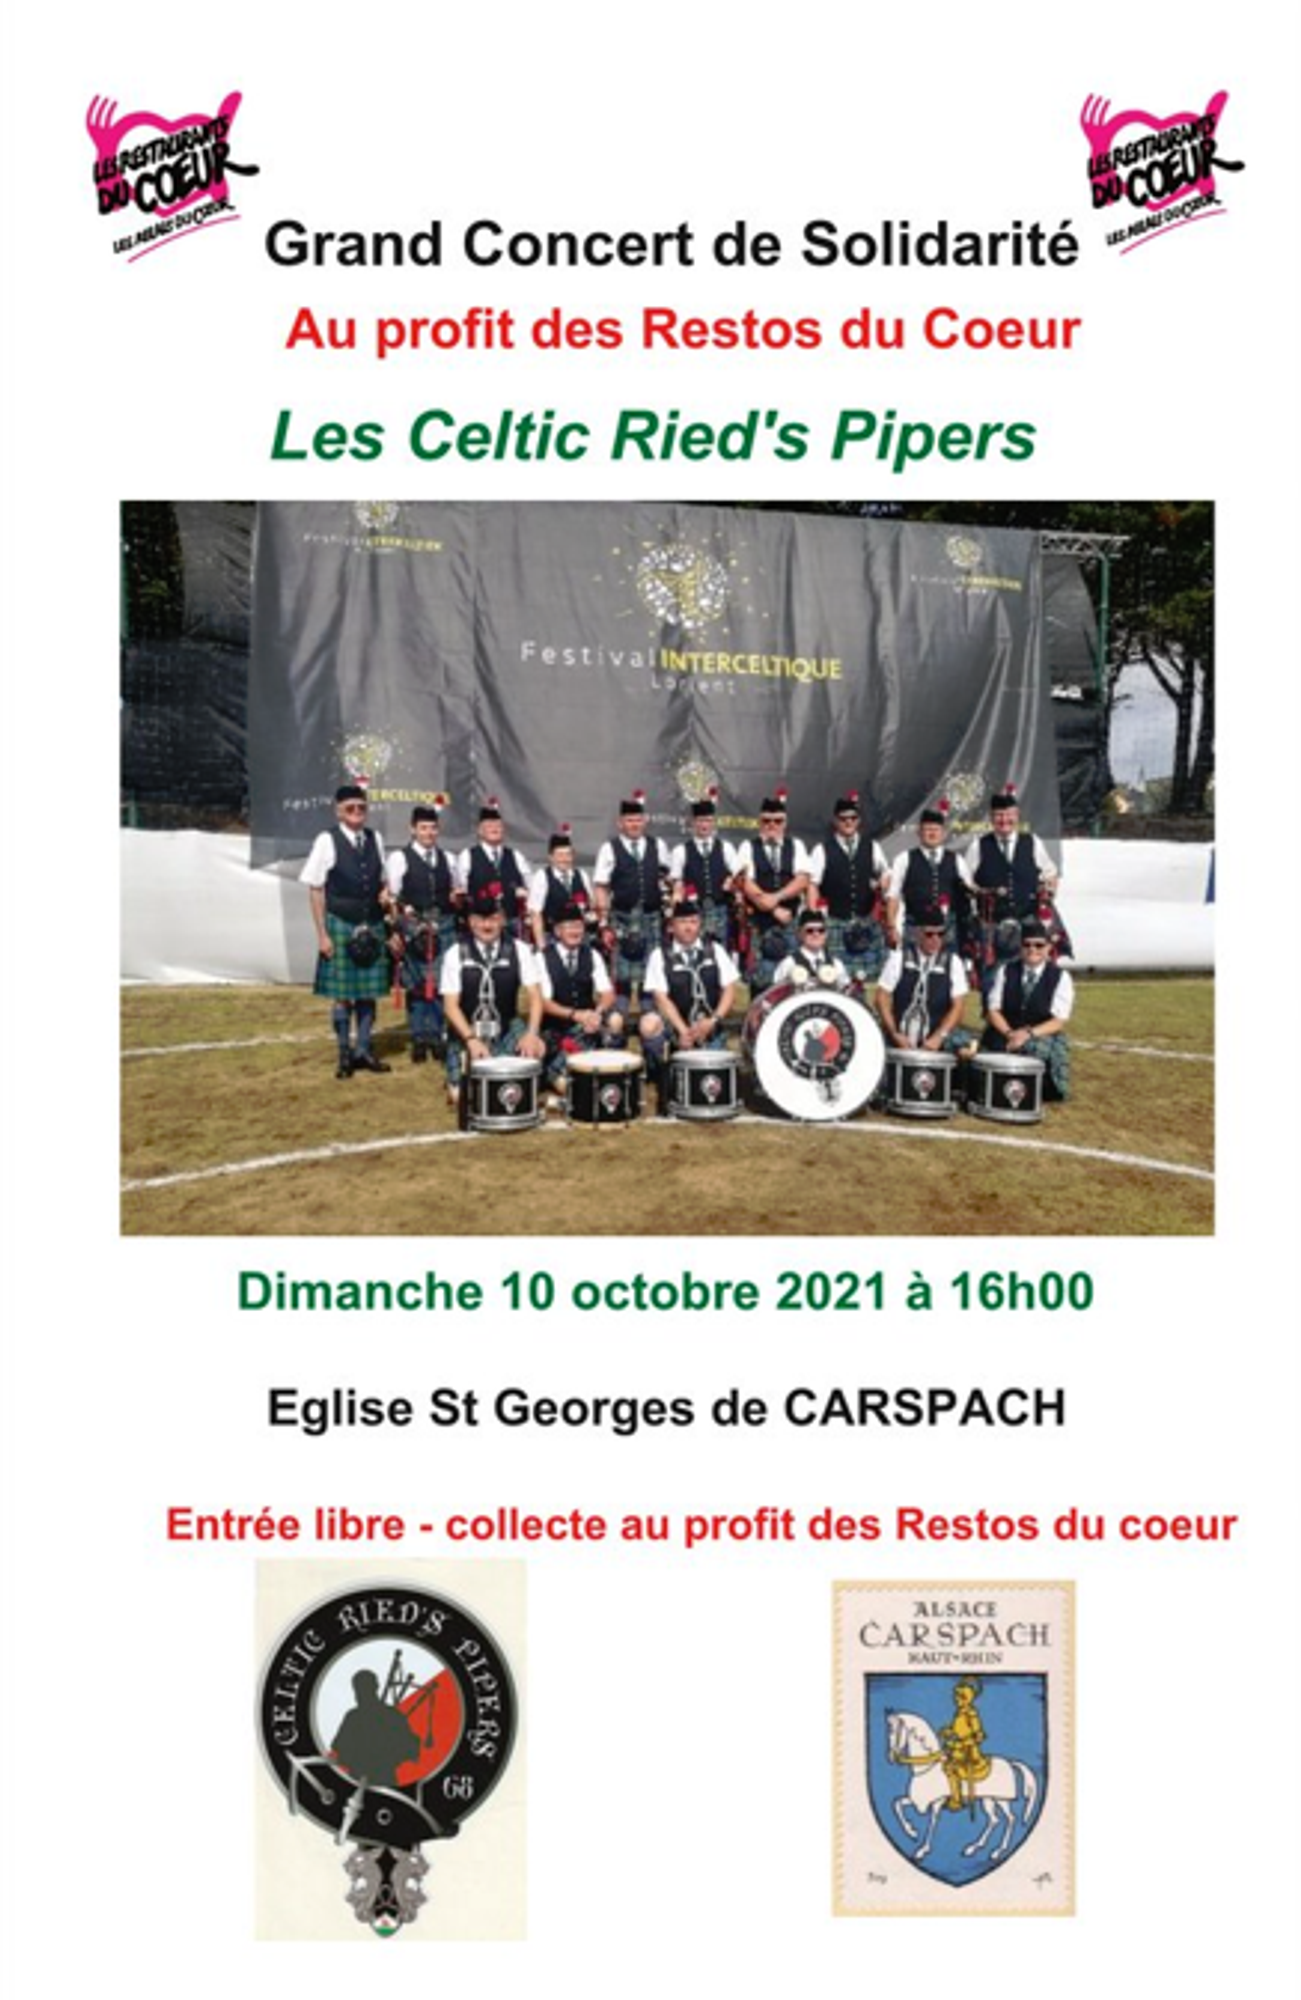 Les Celtic Ried's Pipers